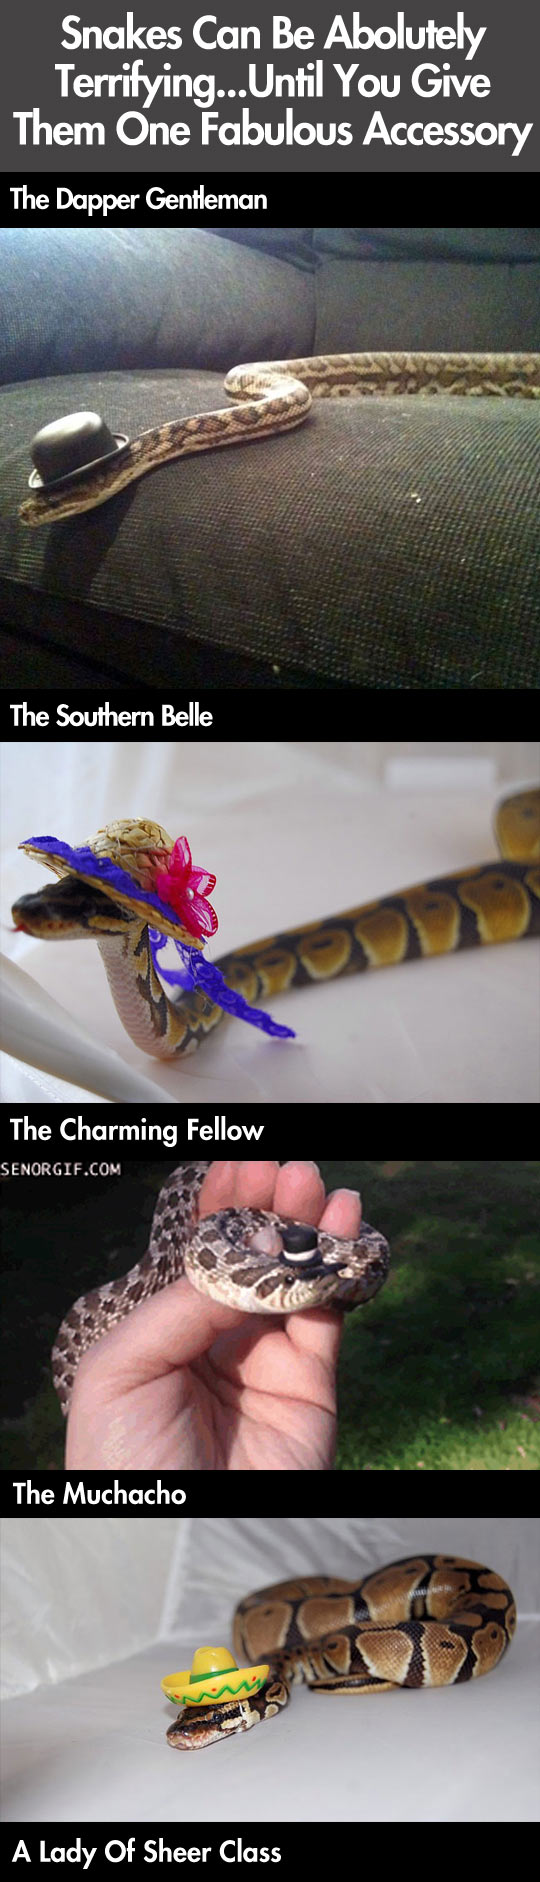 Snakes can terrifying...